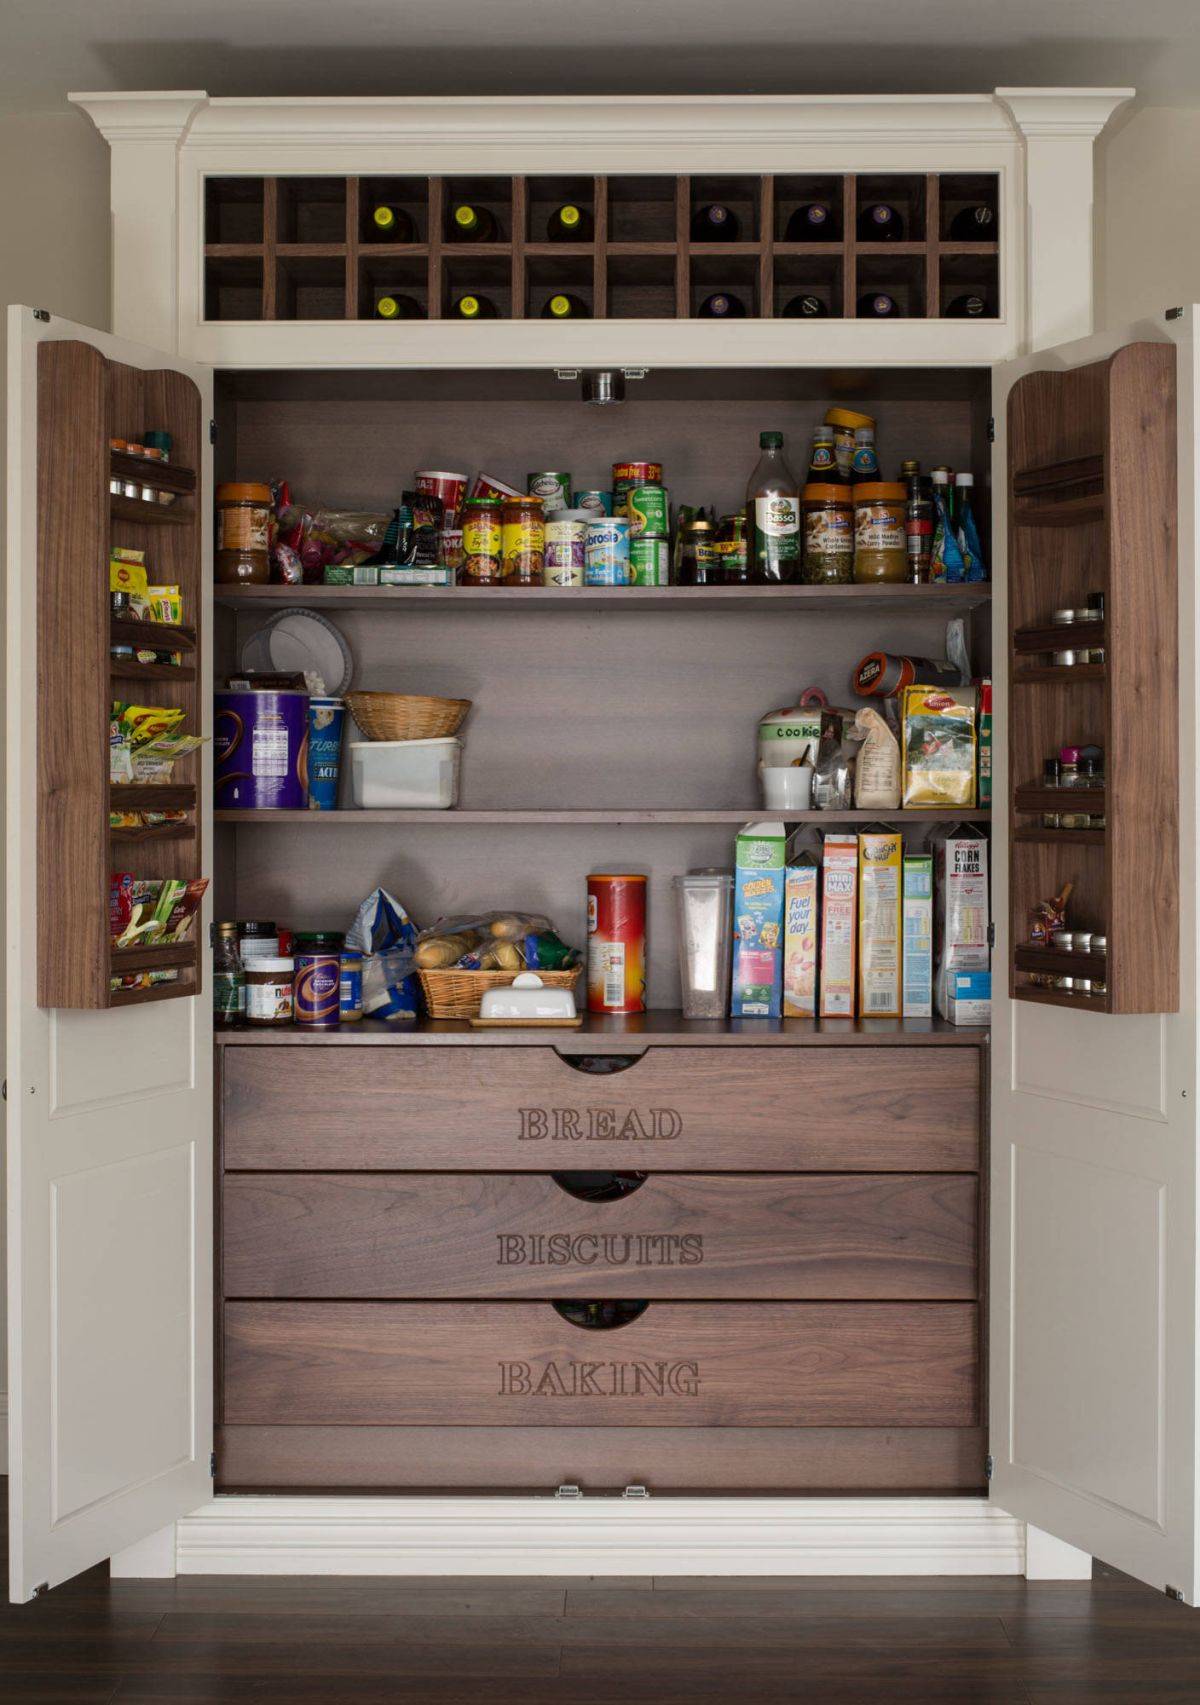 Small-space-savvy-kitchen-pantries-help-organize-your-home-much-better-12907